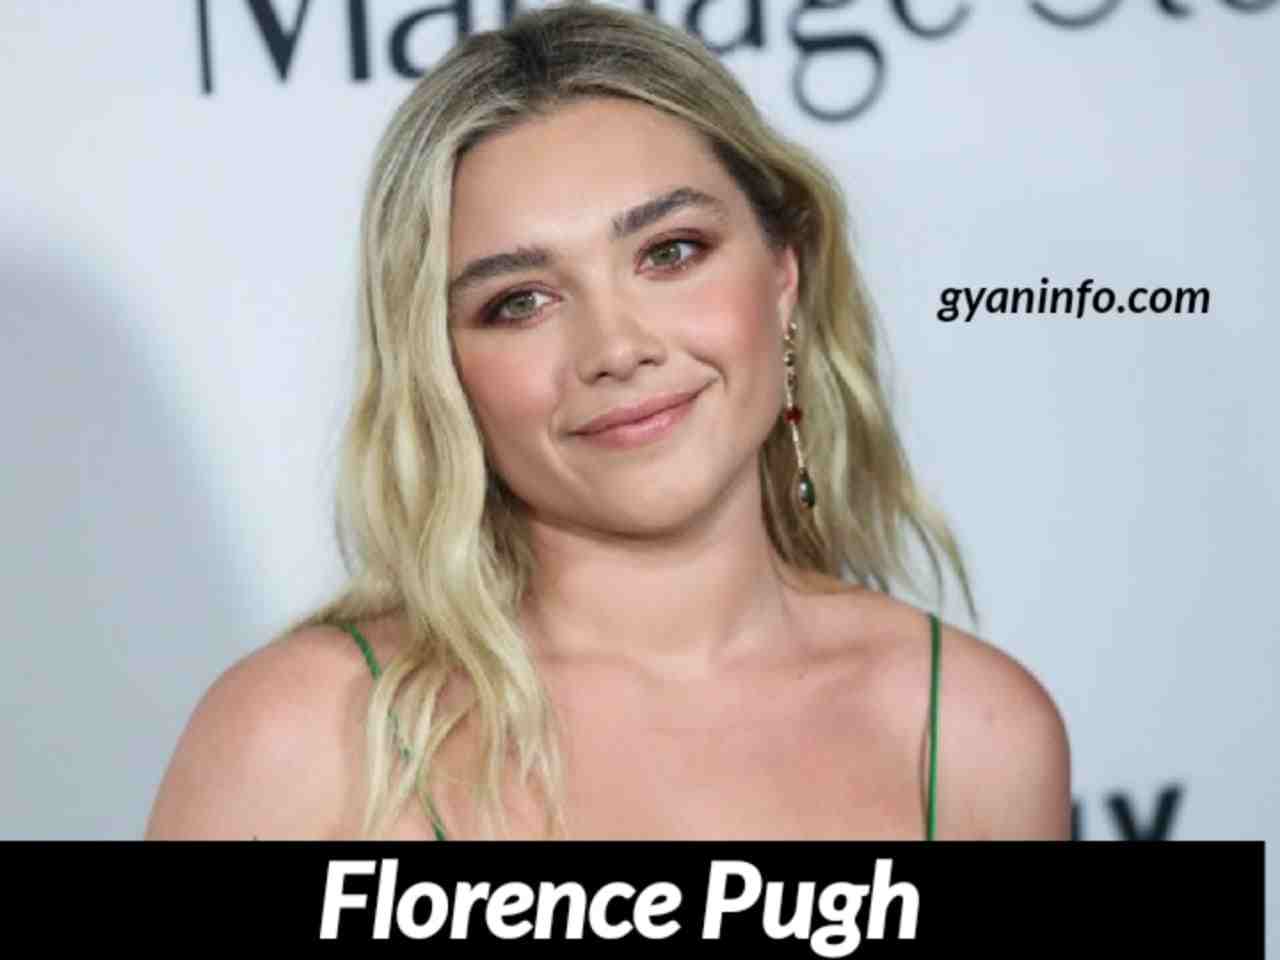 Florence Pugh Age, Height, Biography, Husband, Affairs, Family & More